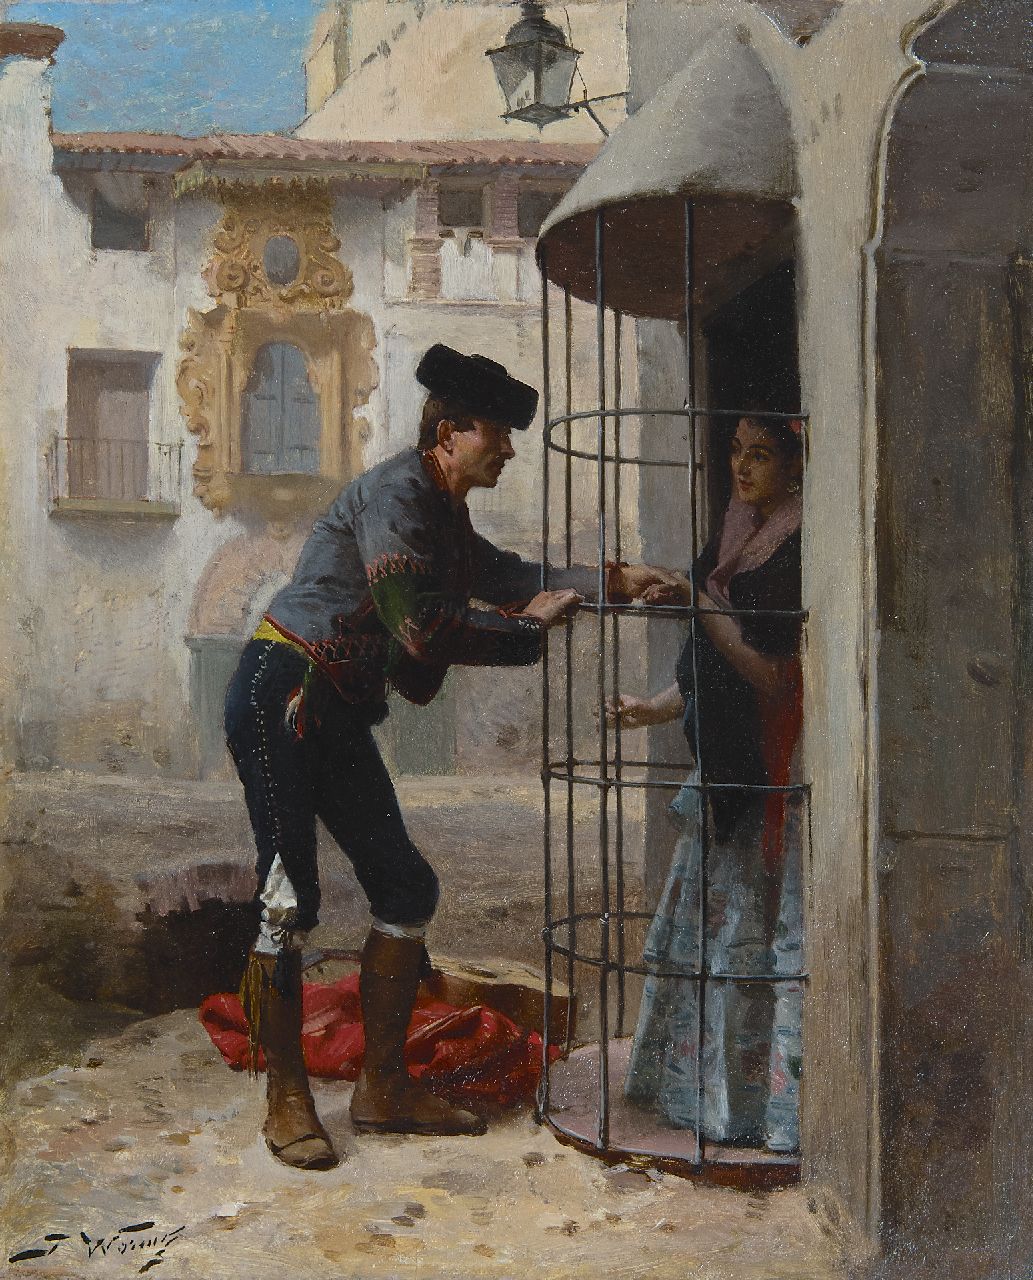 Jules Worms | The amorous torero, oil on panel, 27.0 x 21.8 cm, signed l.l.